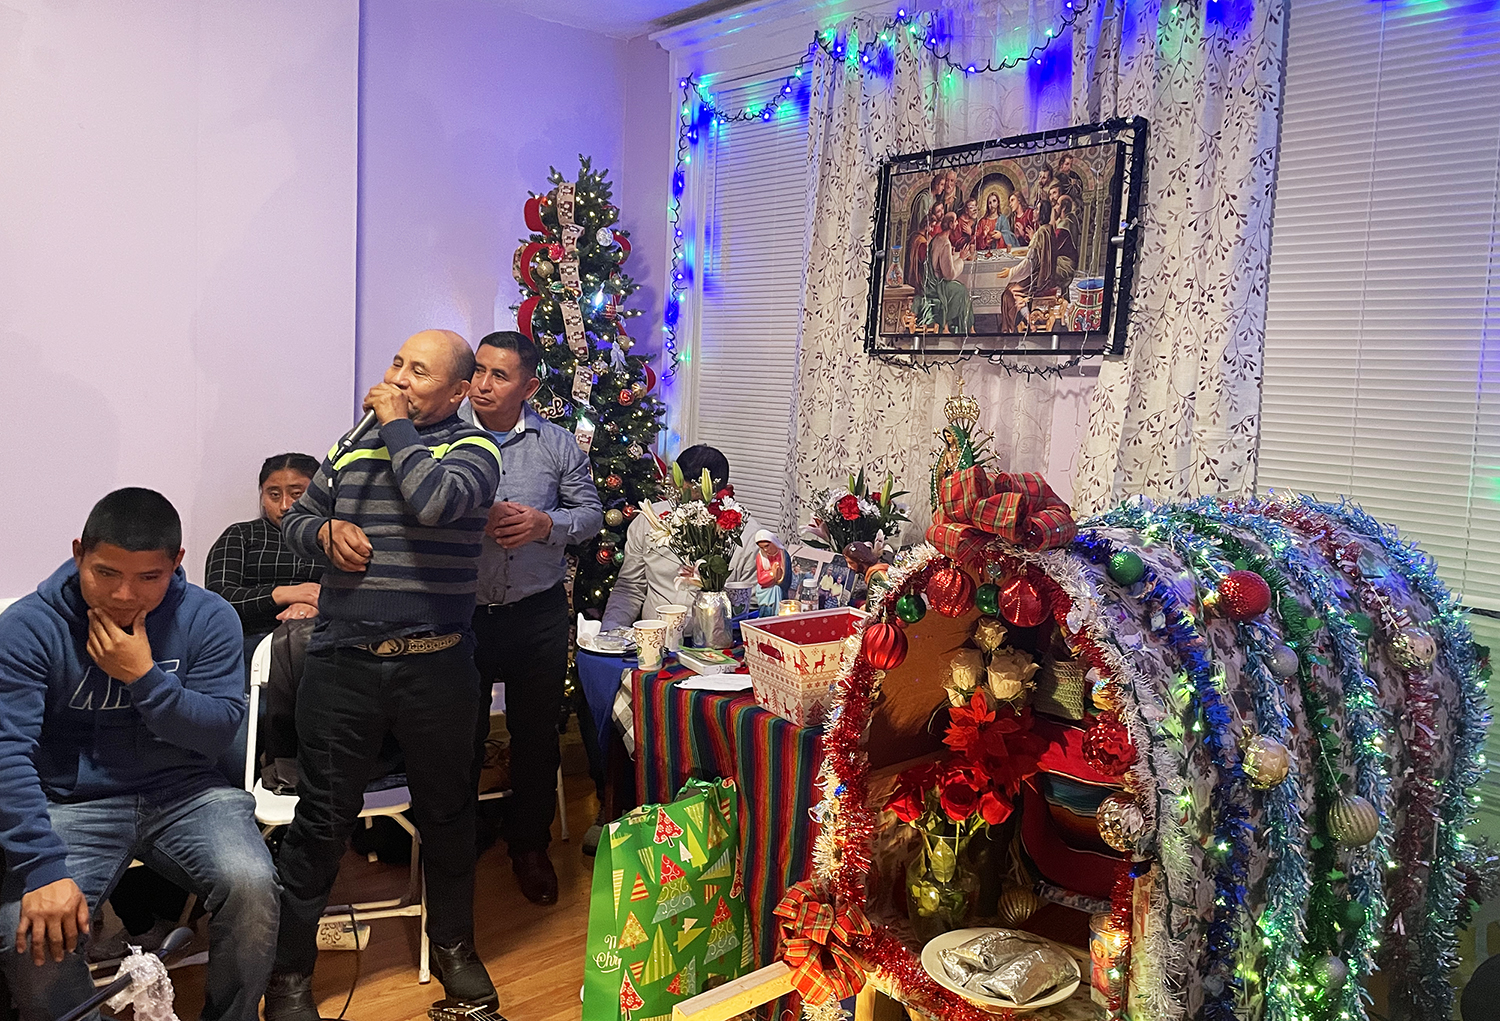 Members of the Catholic Q'eqchi community gathered at a home in Norristown, PA. on Dec. 18, 2022 to celebrate the tradition of las posadas. RNS photo by Emily Neil